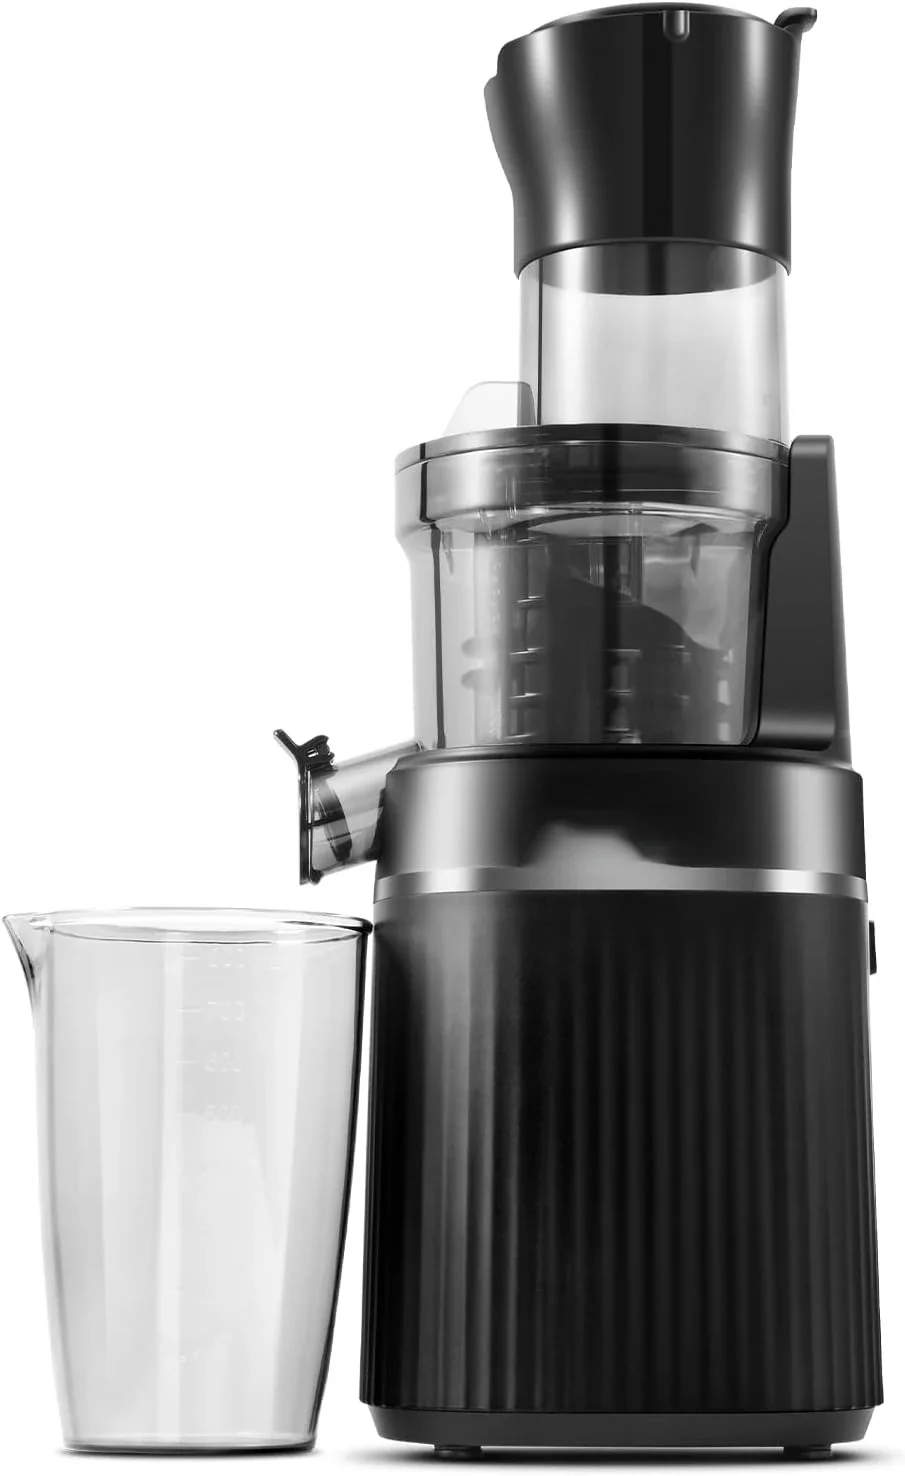 

Quiet and Efficient Cold Press Juicer, Aobosi Slow Masticating Juicer with Large Feed Chute for Easy Juicing, Reverse Function f